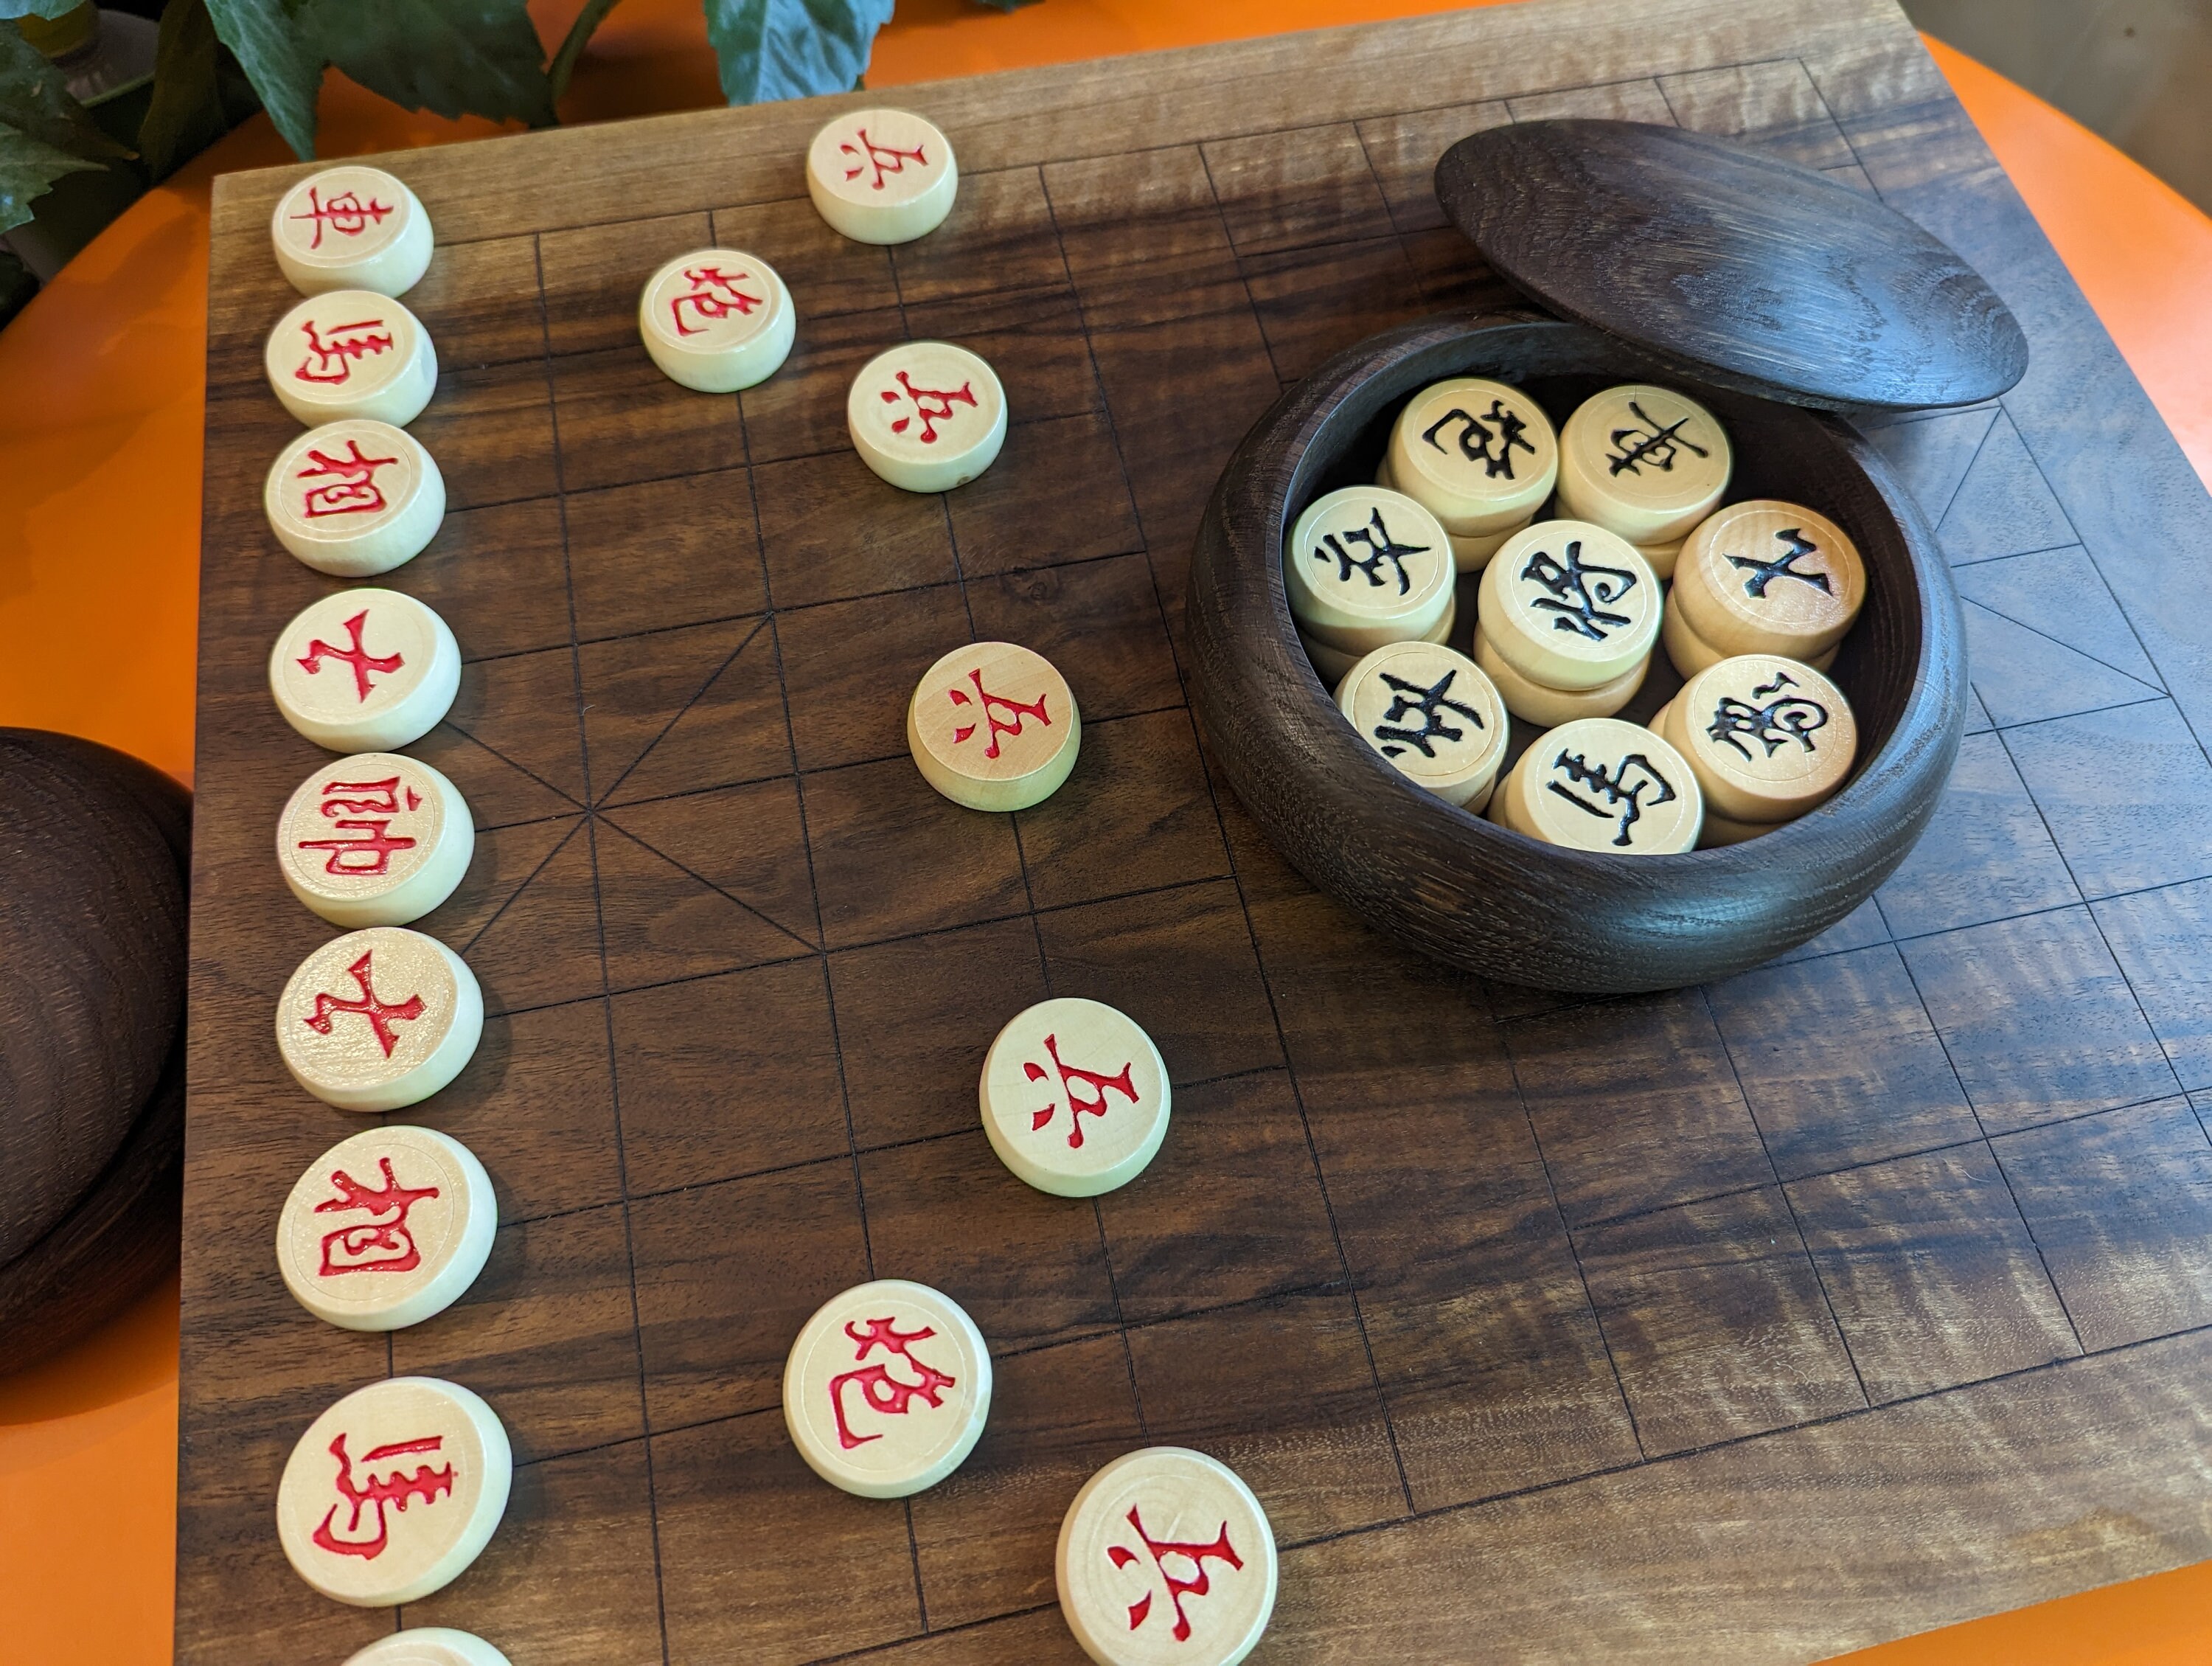 XIANGQI (CHINESE CHESS) 4.2 cm PIECES, 20 inch FAUX SUEDE PLAYING